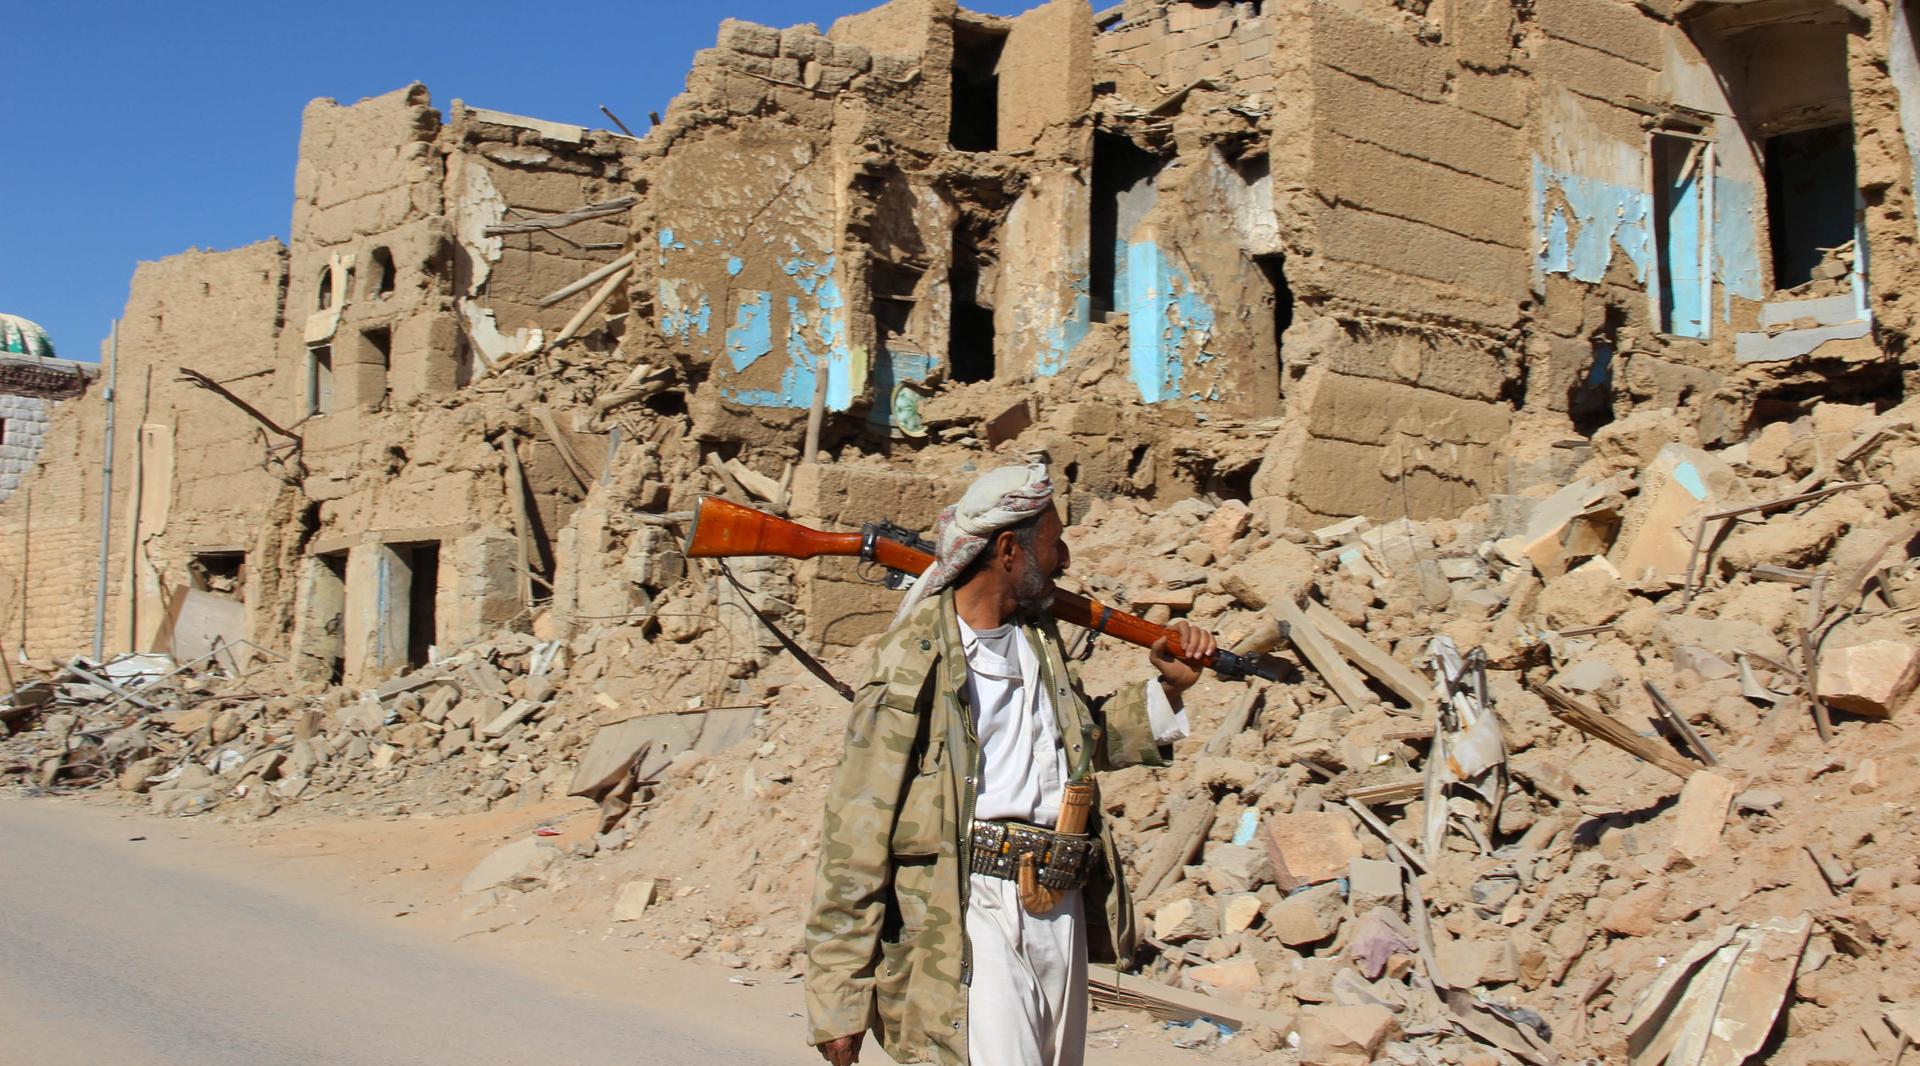 A Houthi armed man walks past destroyed houses in the old quarter of the northwestern city of Saada, Yemen, on Jan. 11.